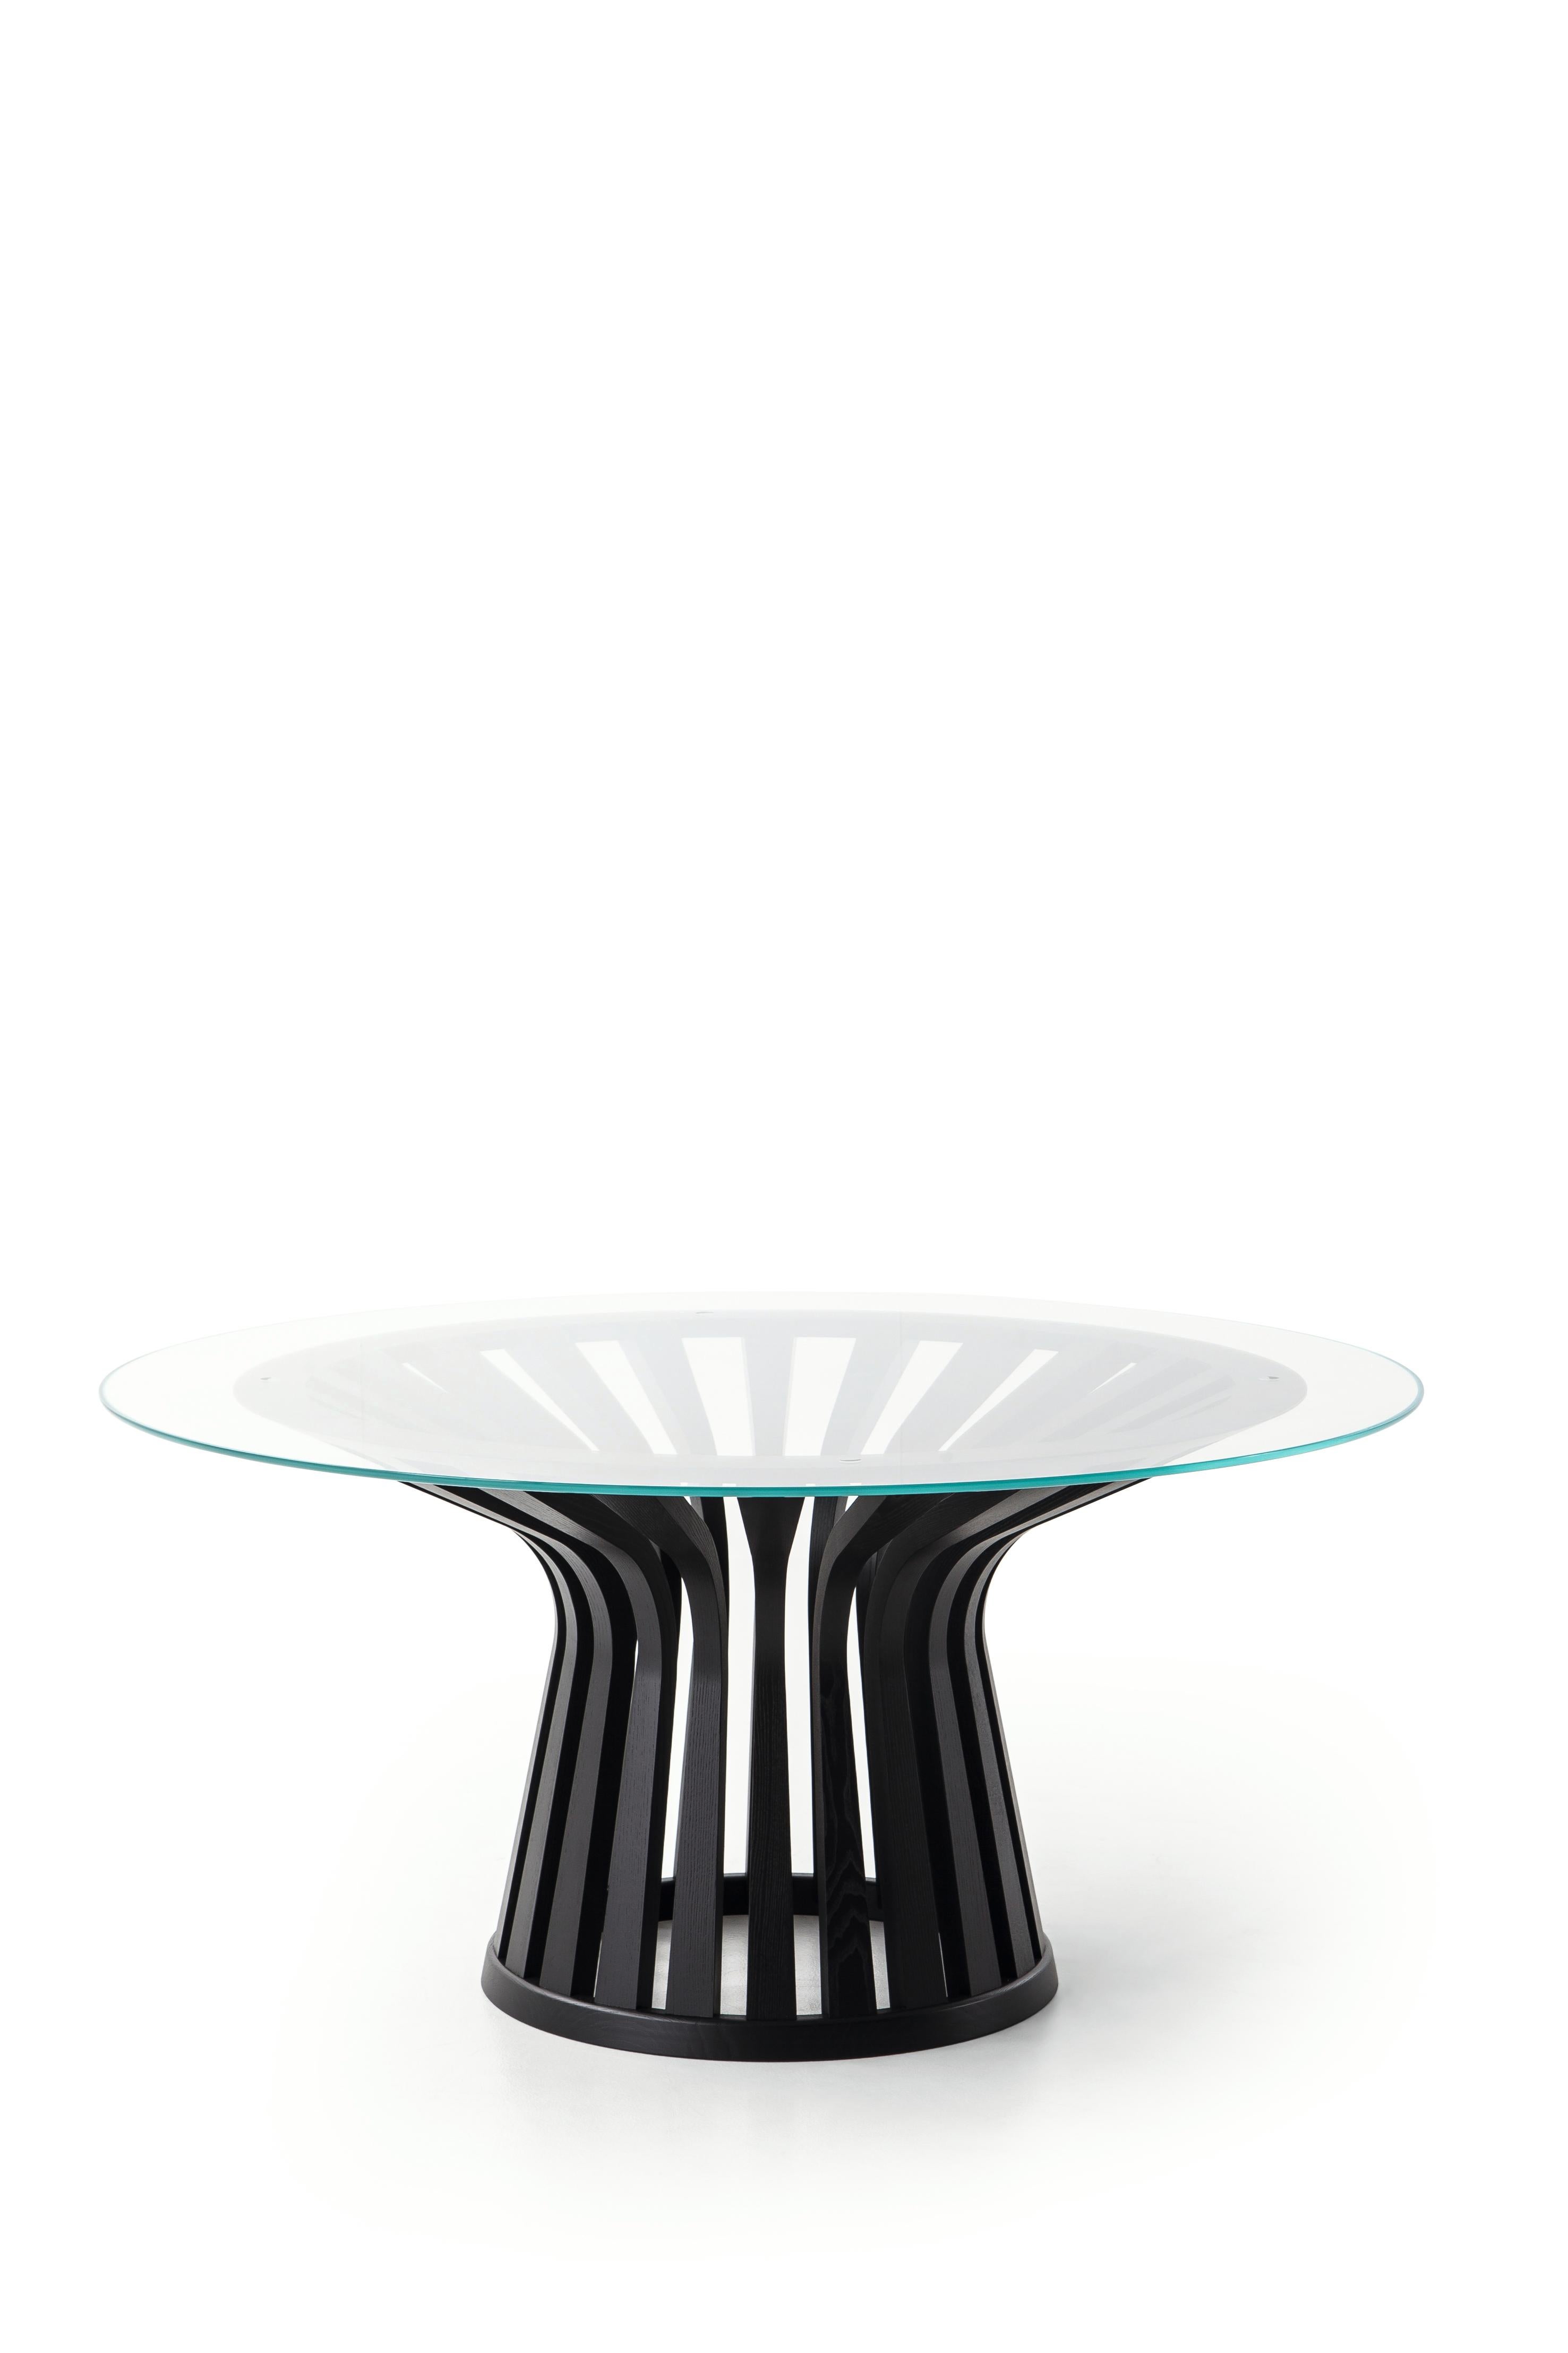 Lebeau Wood and Marble Table by Patrick Jouin For Sale 4